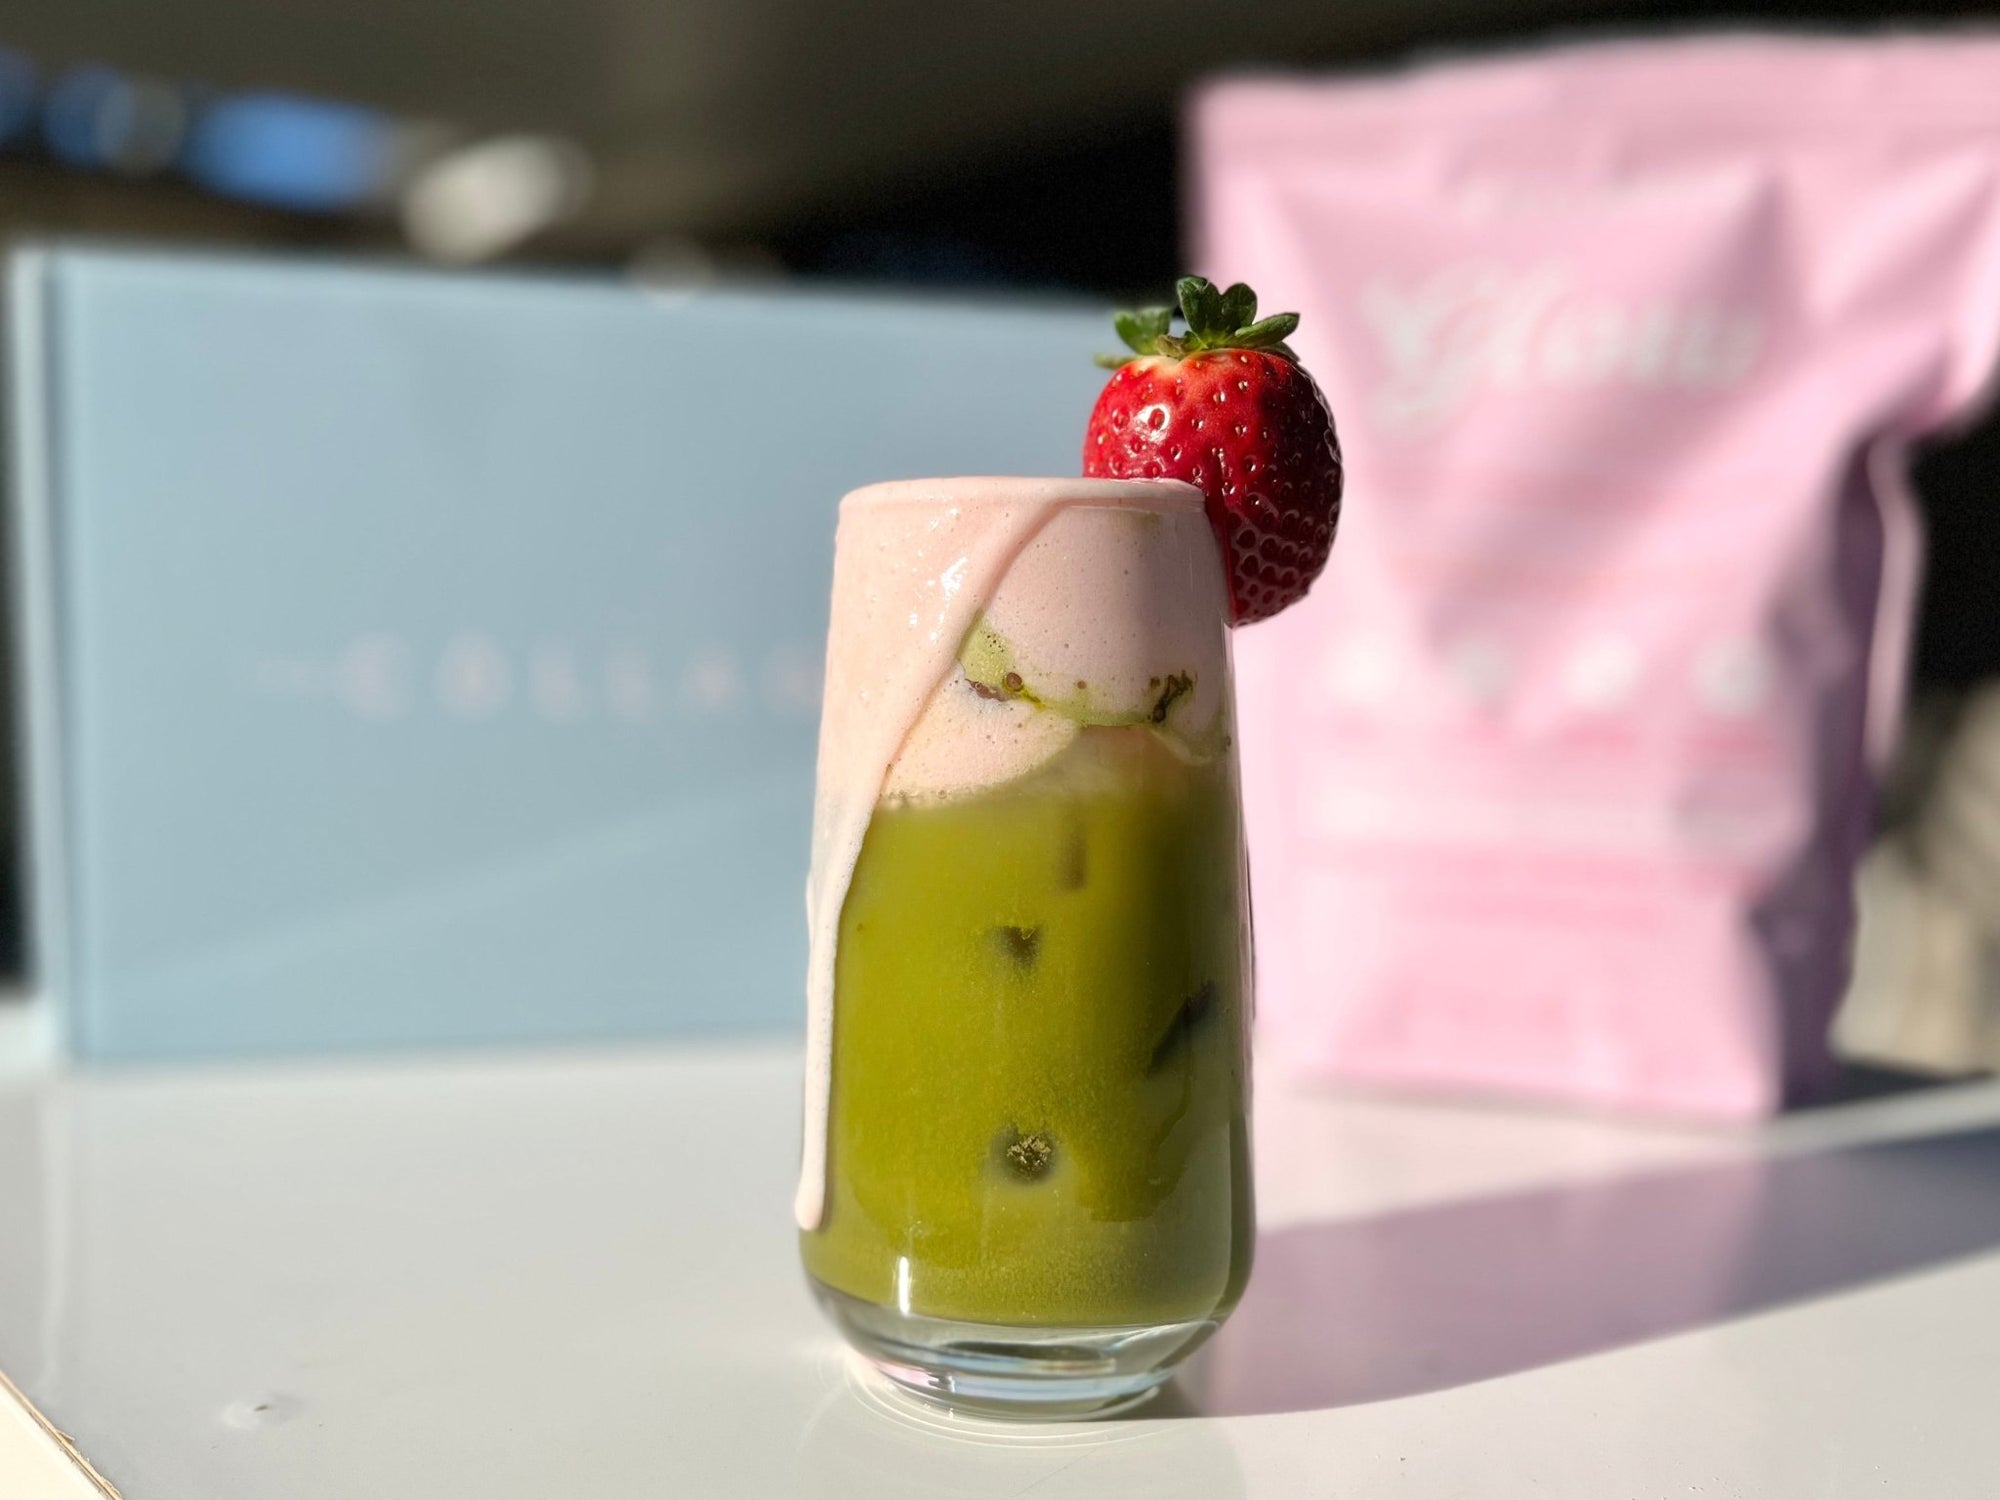 Strawberry Matcha Latte - The Collagen Co.